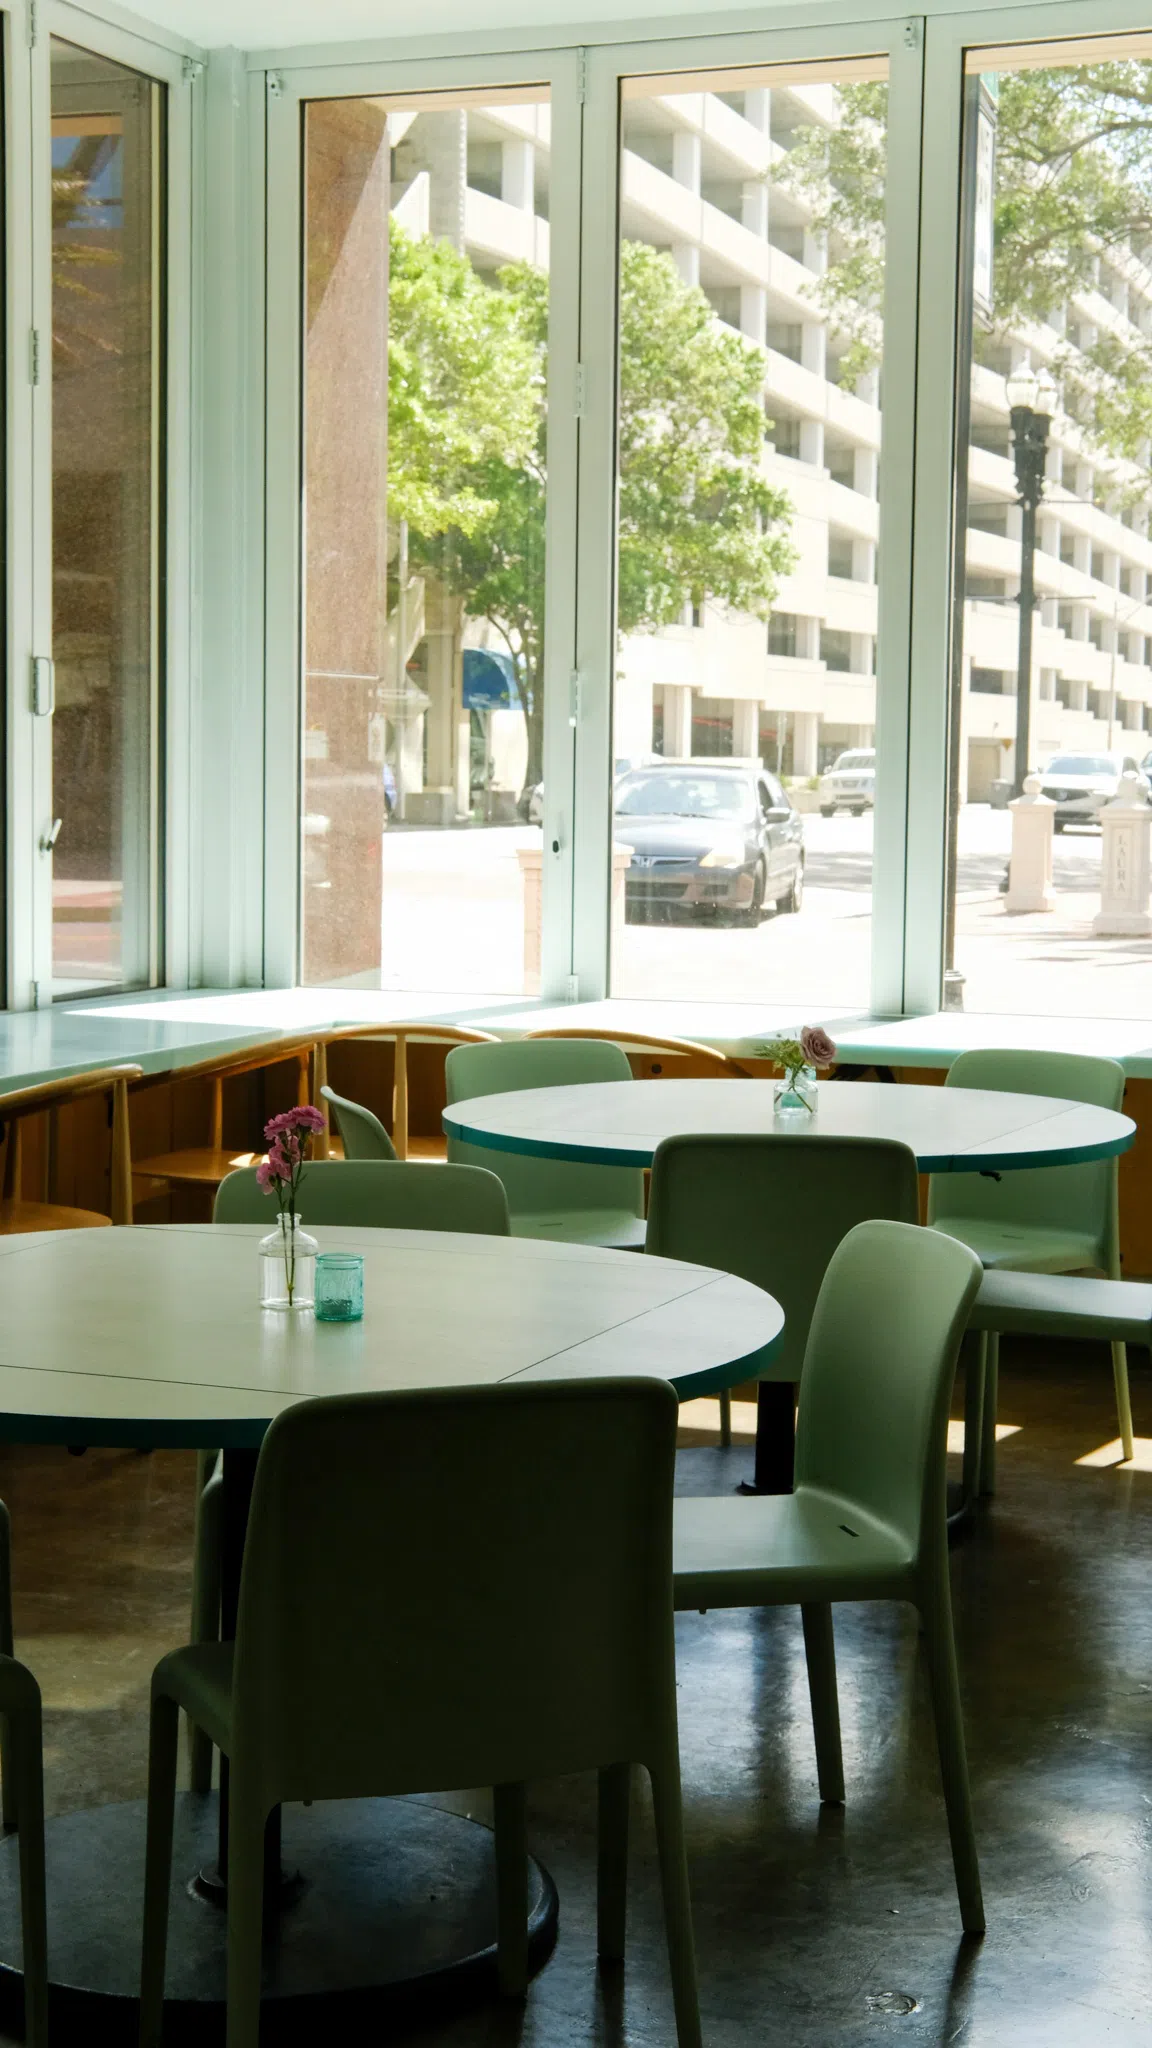 Large white dining tables arranged in a room surrounded by windows with a view of the streets of downtown Jacksonville.